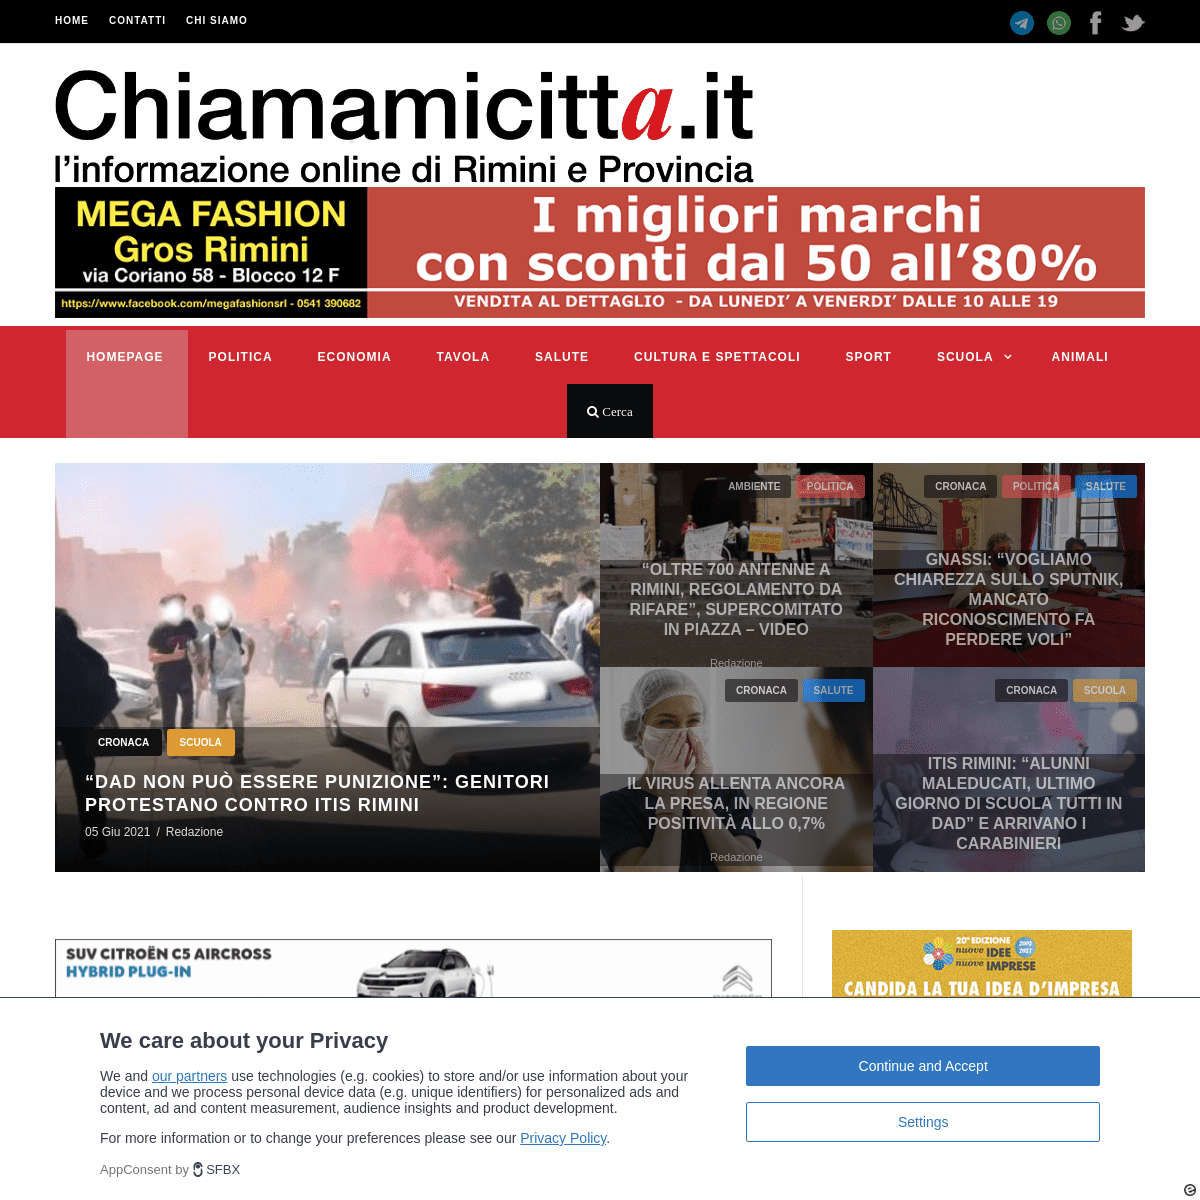 A complete backup of https://chiamamicitta.it